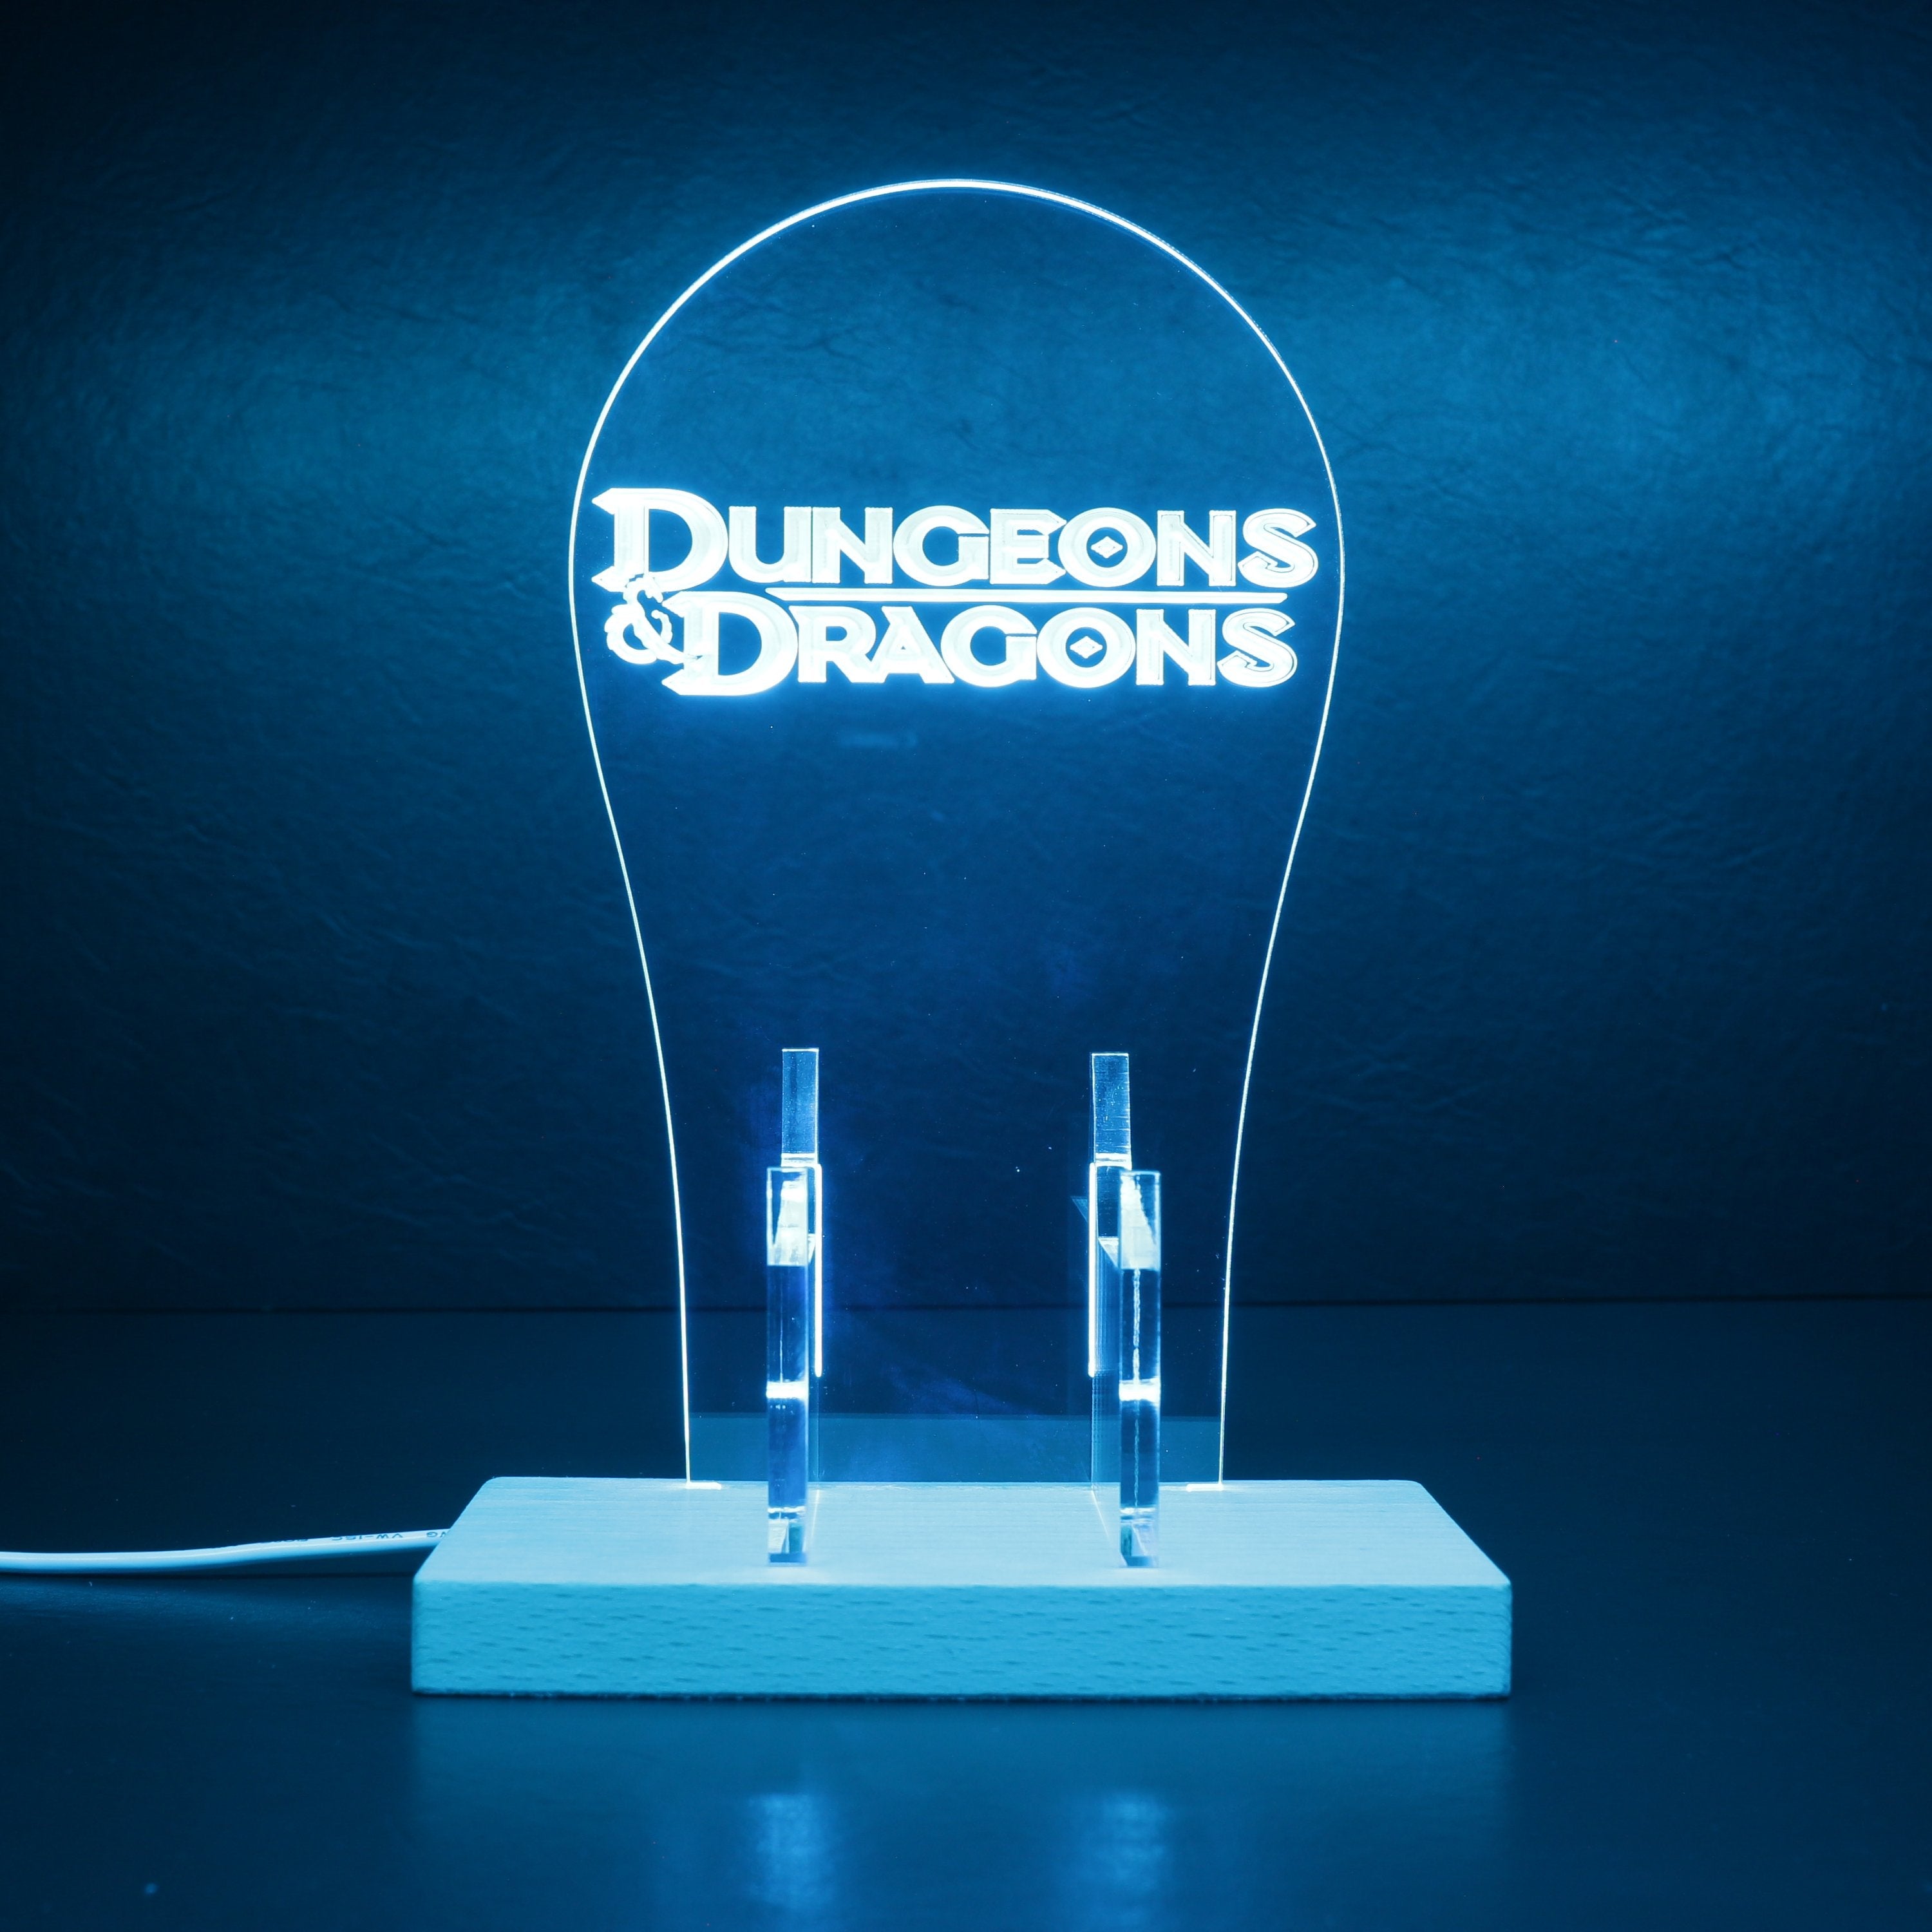 D&D LED Gaming Headset Controller Stand